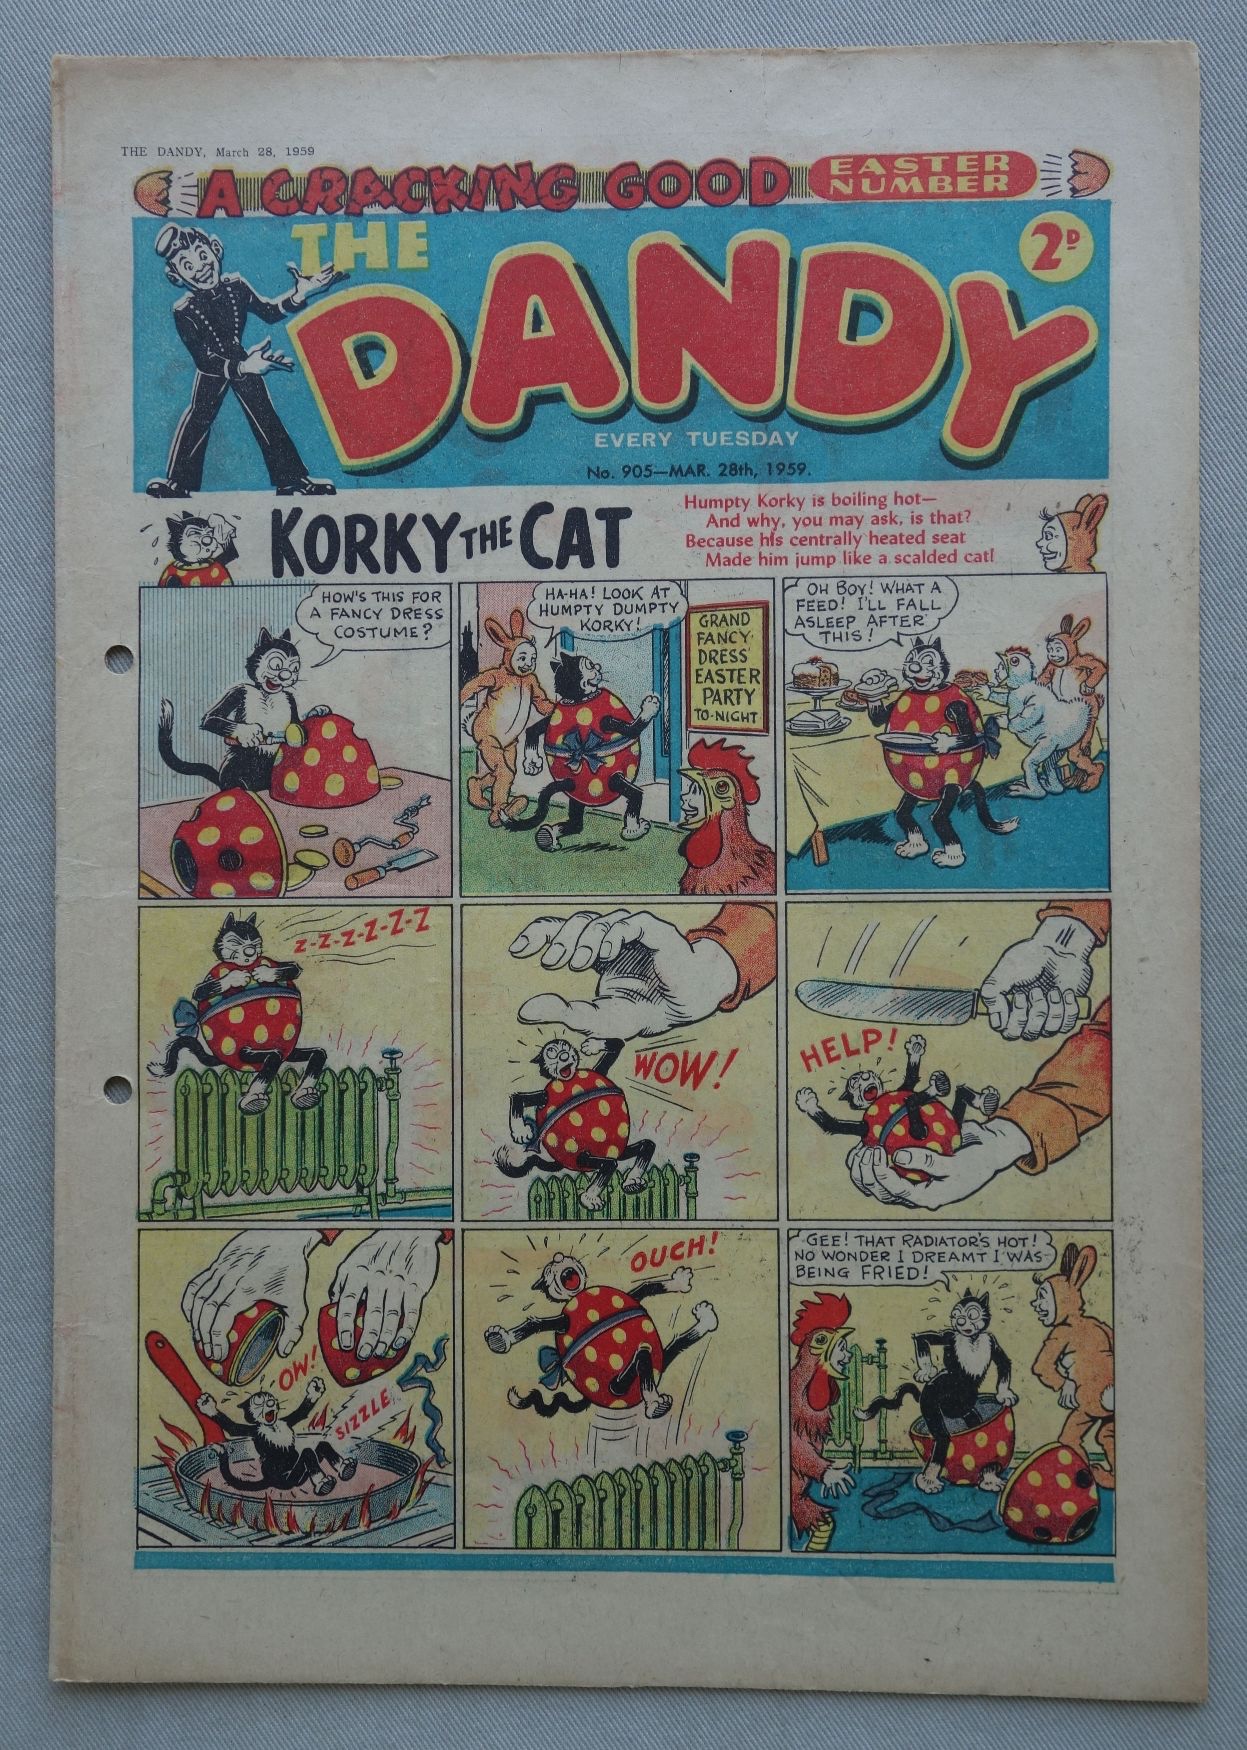 Dandy Issue 905 - cover dated 28th March 1959 - Easter issue